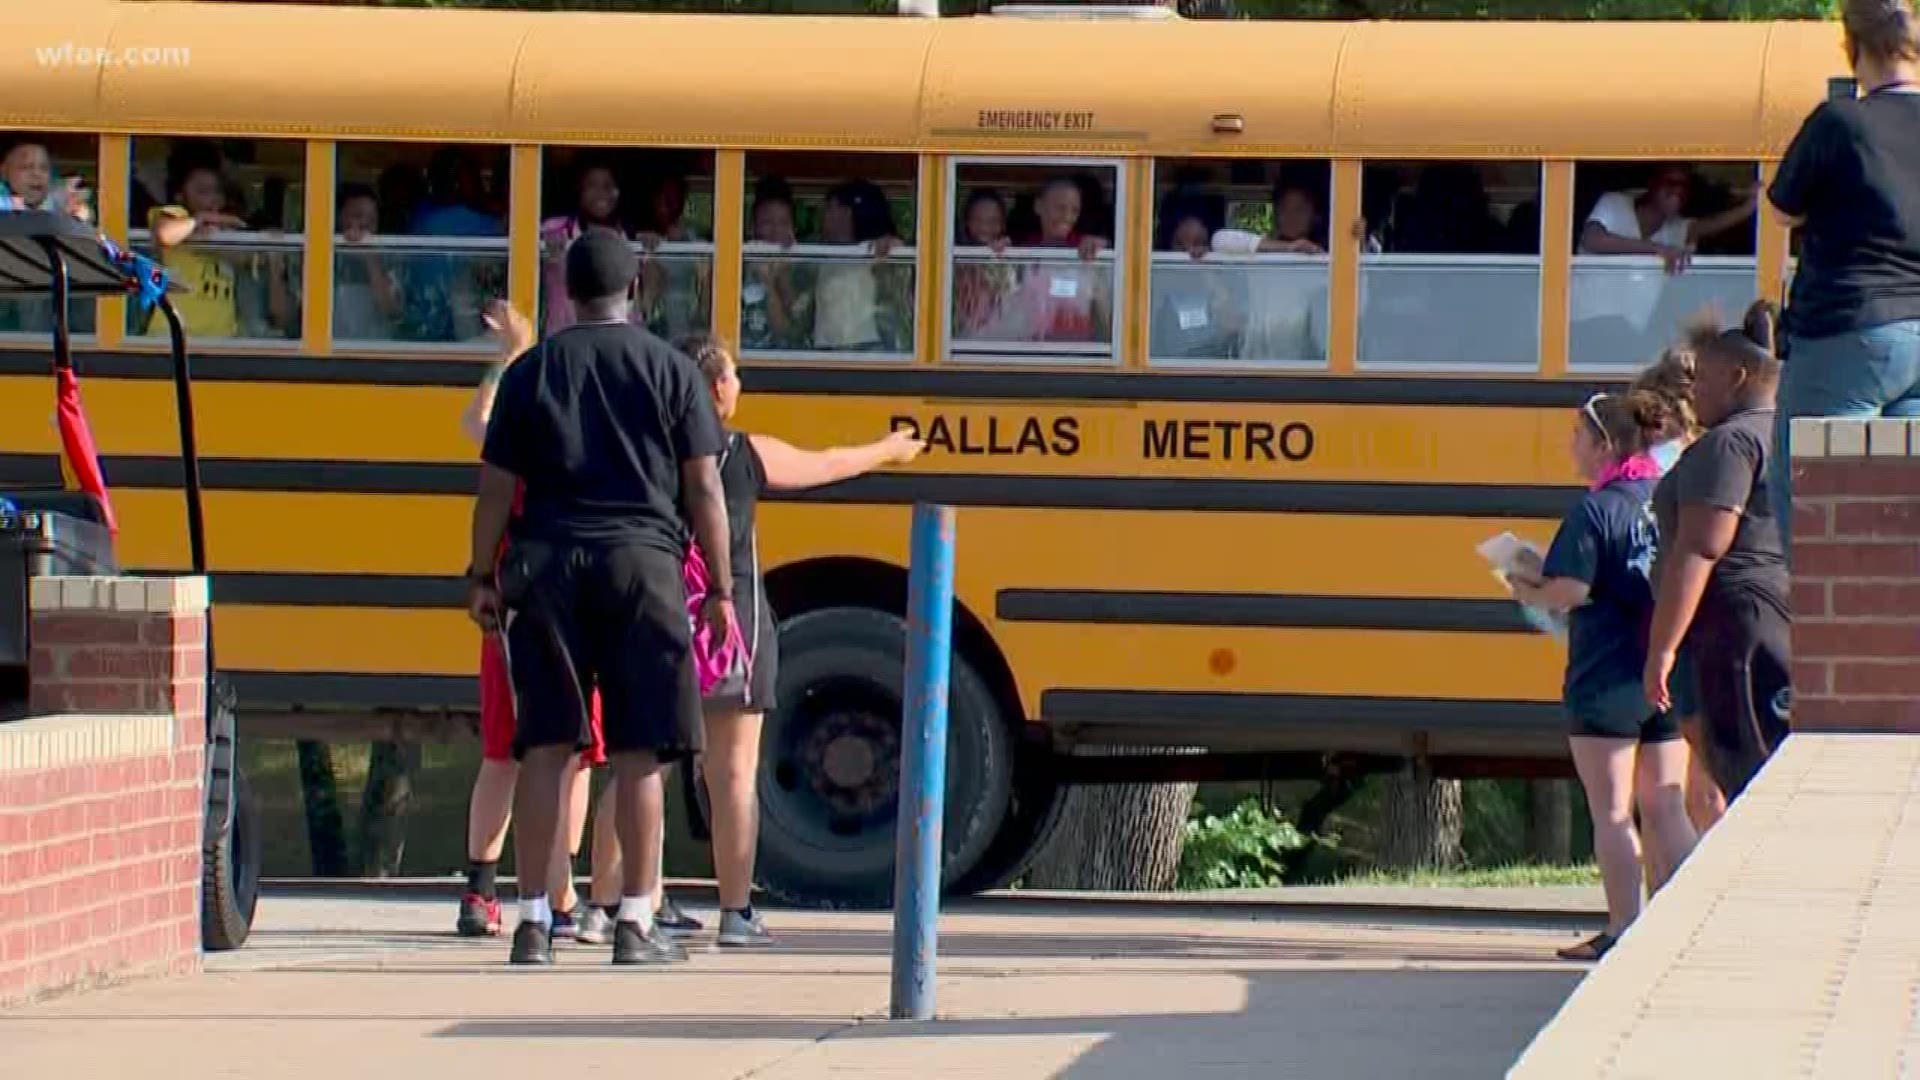 'These kids' lives will be changed forever': Donations come in from across the country to help Dallas Metro continue its annual summer camp after sponsor backs out.